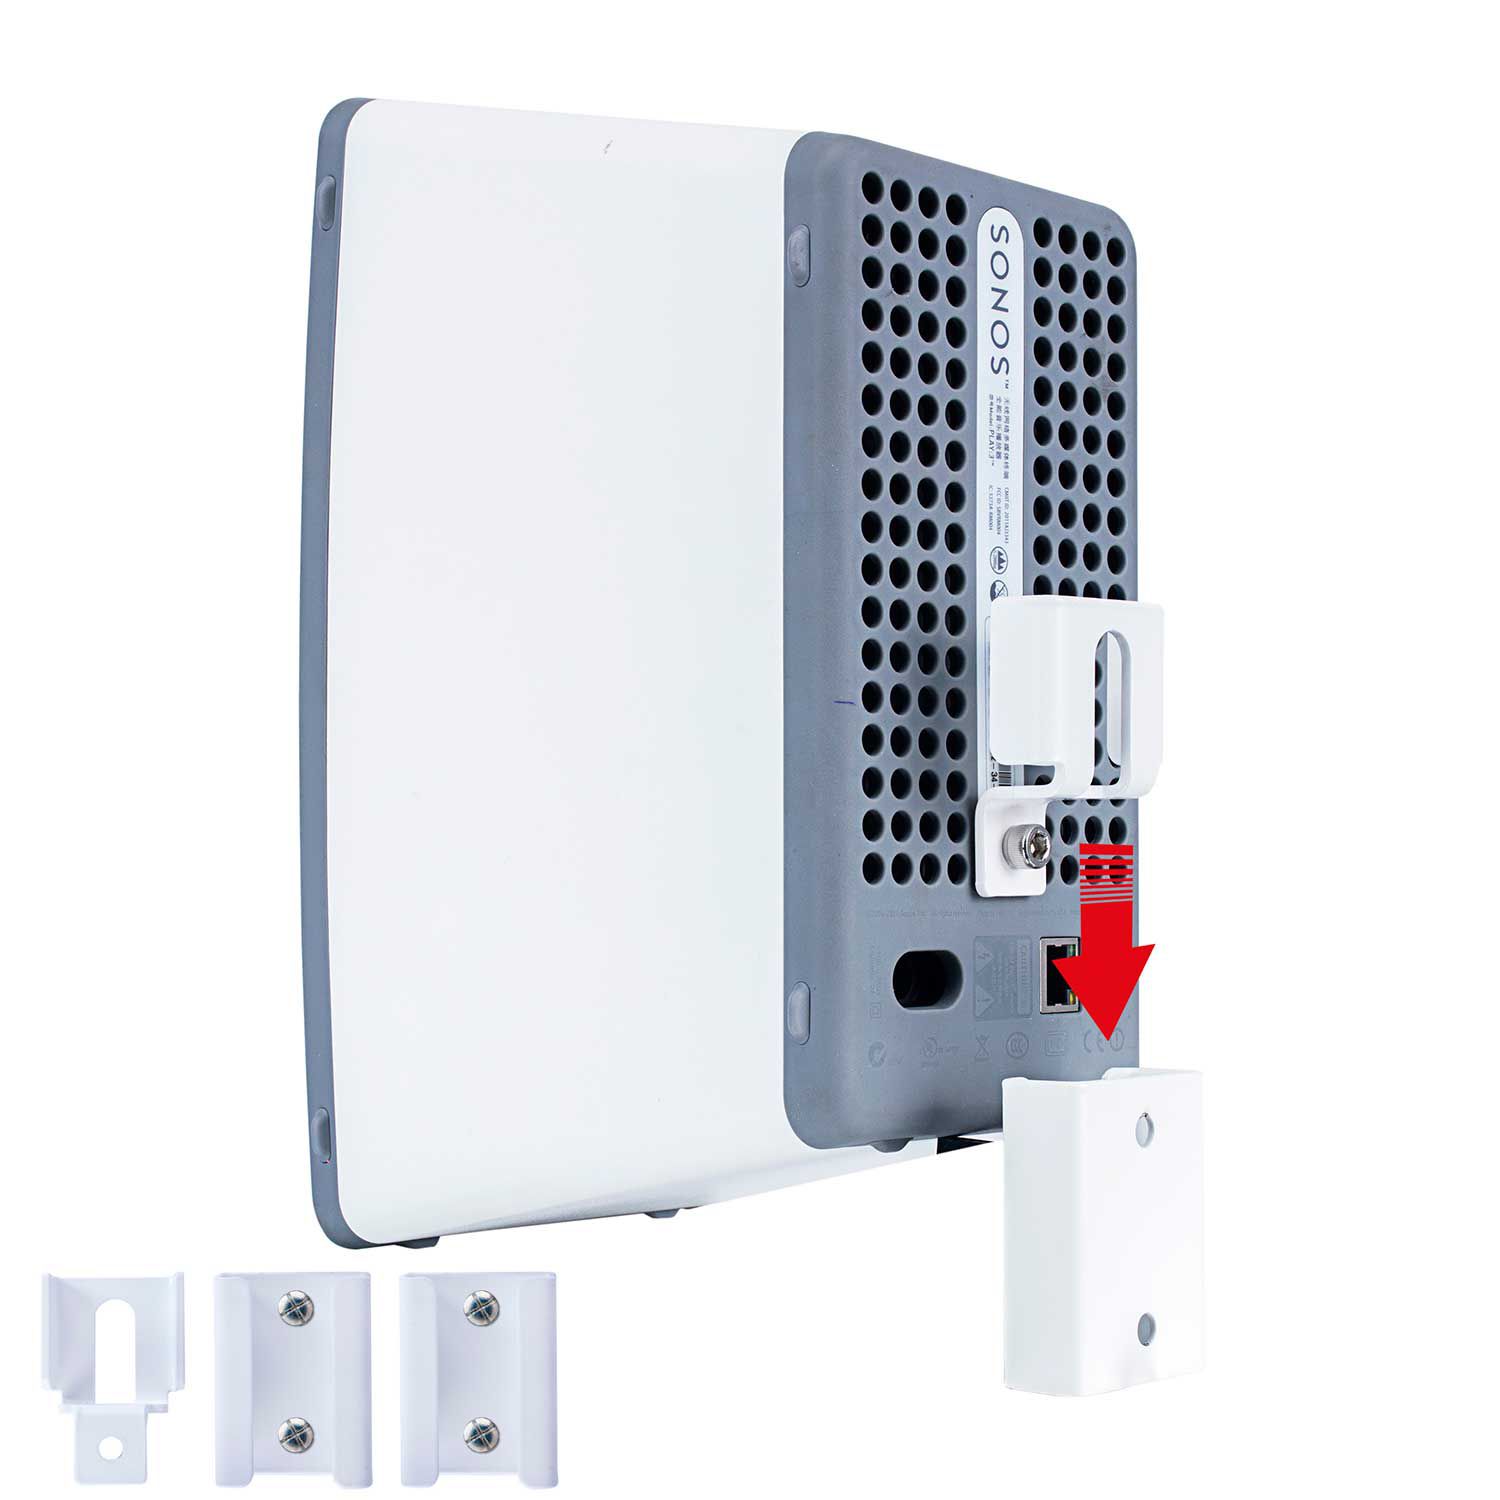 Vebos portable wall mount Sonos Play 3 white The flexible hanging system for Sonos Play:3